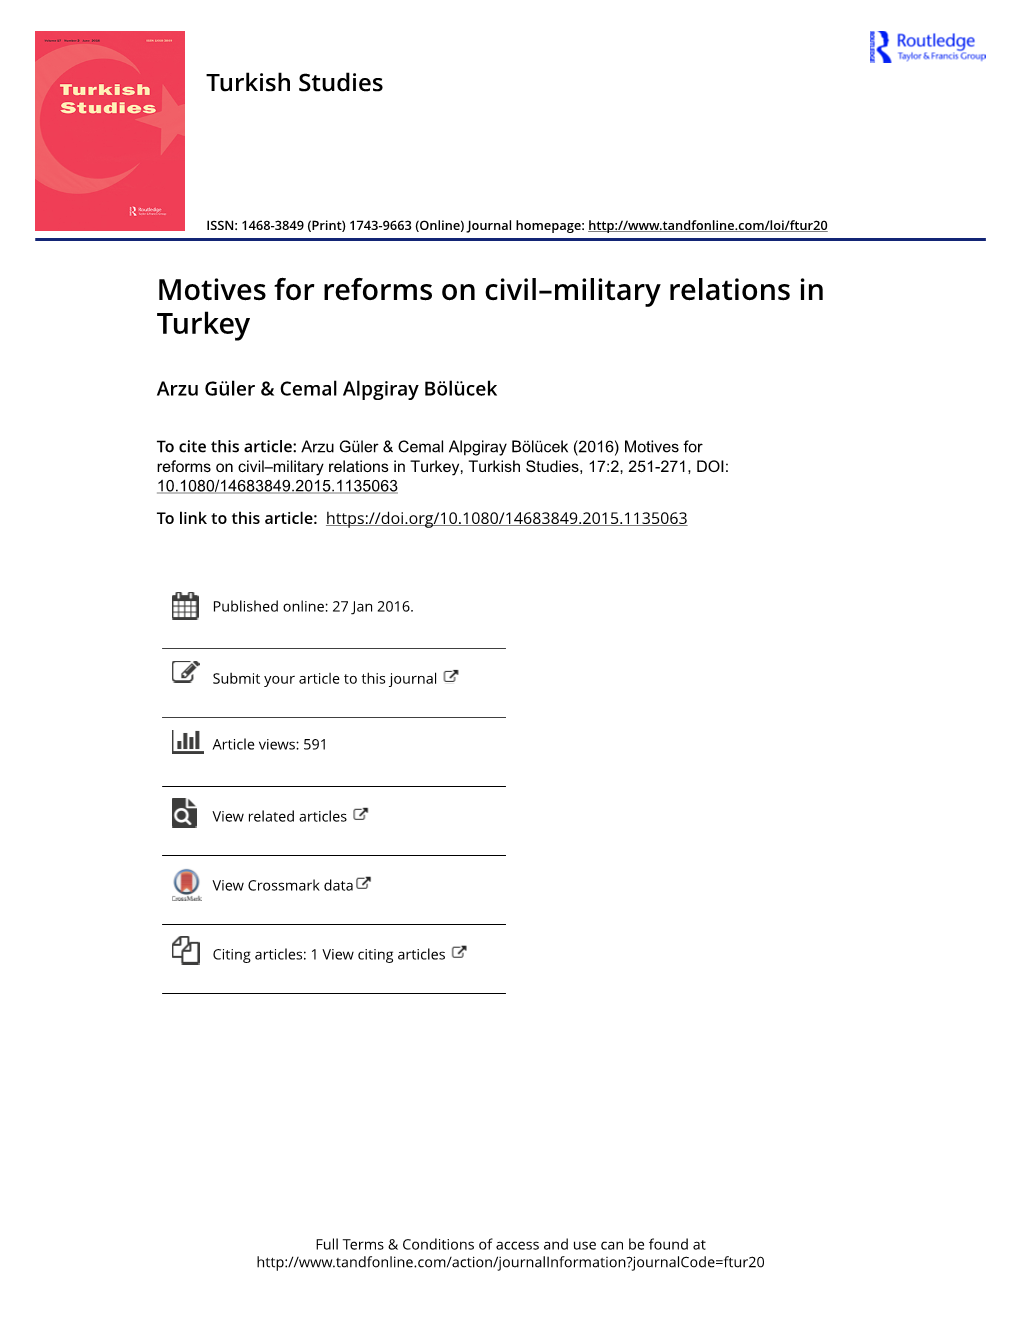 Motives for Reforms on Civil–Military Relations in Turkey